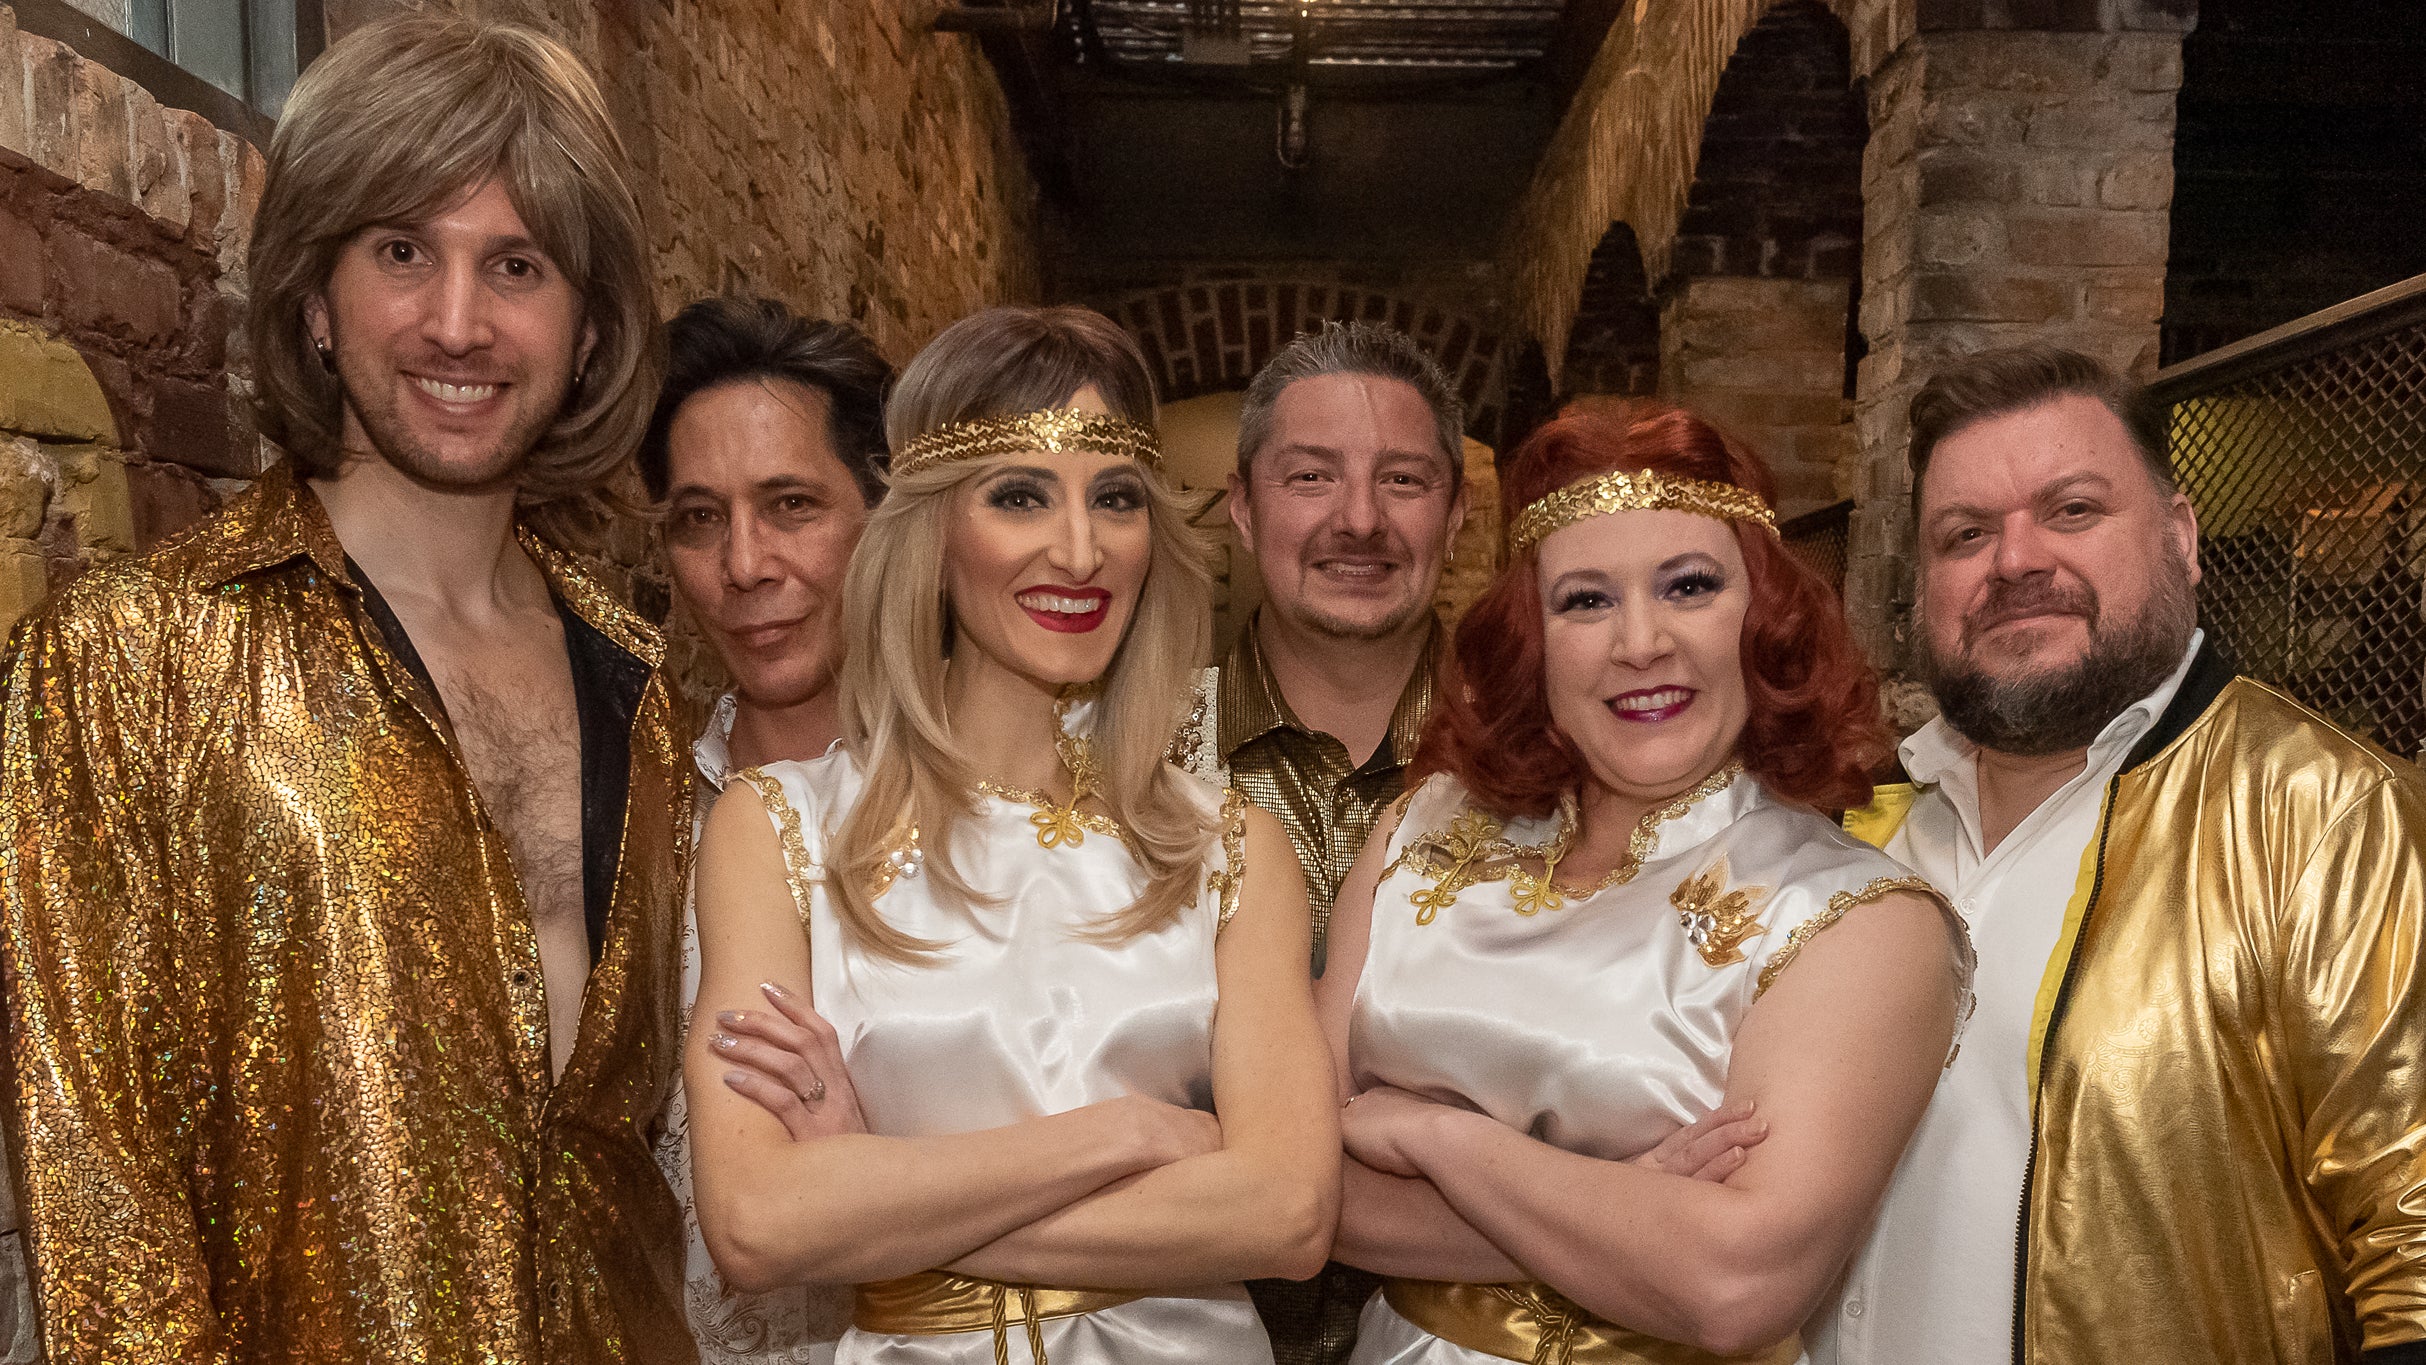 Dancing Queen: A Tribute to Abba in Niagara Falls promo photo for Ticketmaster's 2023 Holiday Gift Guide presale offer code